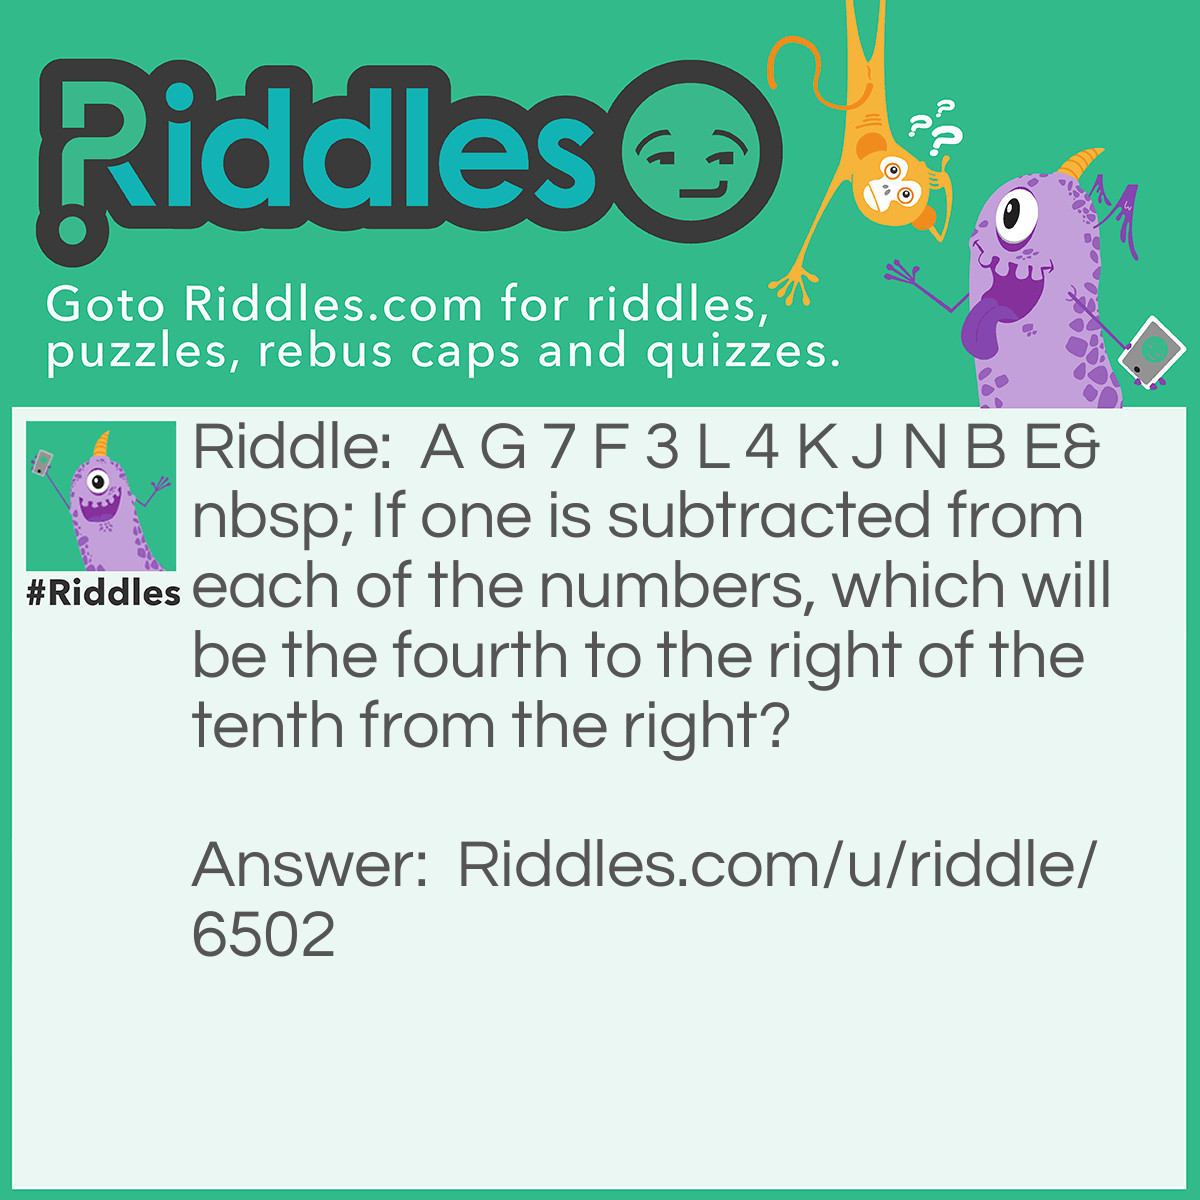 Riddle: A G 7 F 3 L 4 K J N B E If one is subtracted from each of the numbers, which will be the fourth to the right of the tenth from the right? Answer: 3. Explanation : Fourth to the right of the tenth from the right means 10 - 4 = 6th from the right, i.e 4.  But according to the question, one is subtracted from each of the numbers :. 3 is the answer.